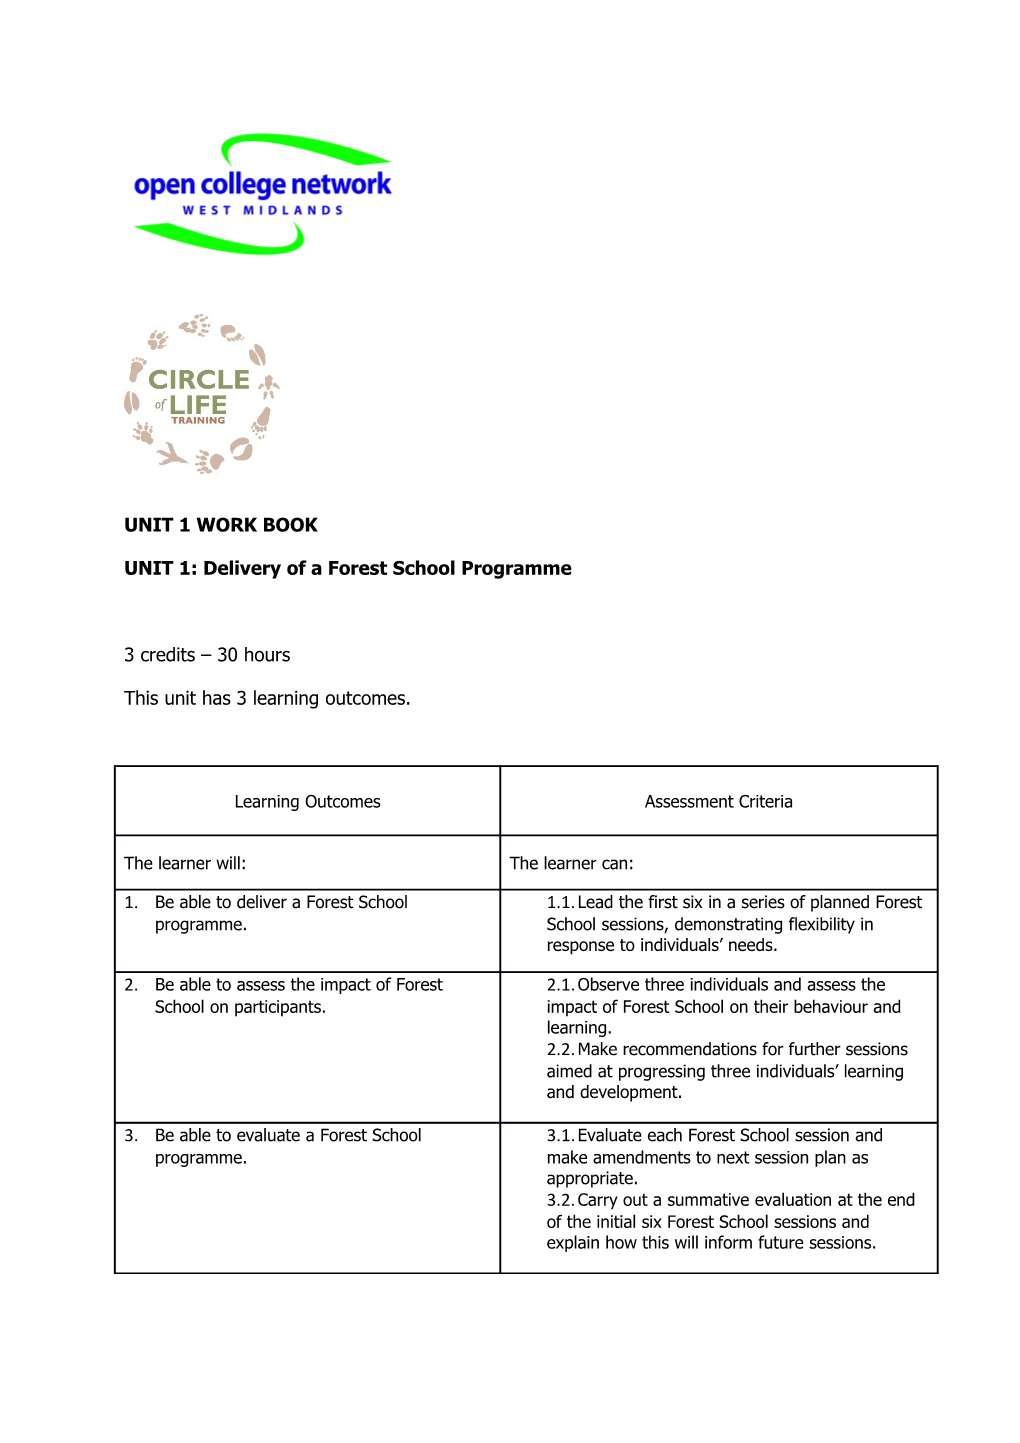 UNIT 1: Delivery of a Forest School Programme